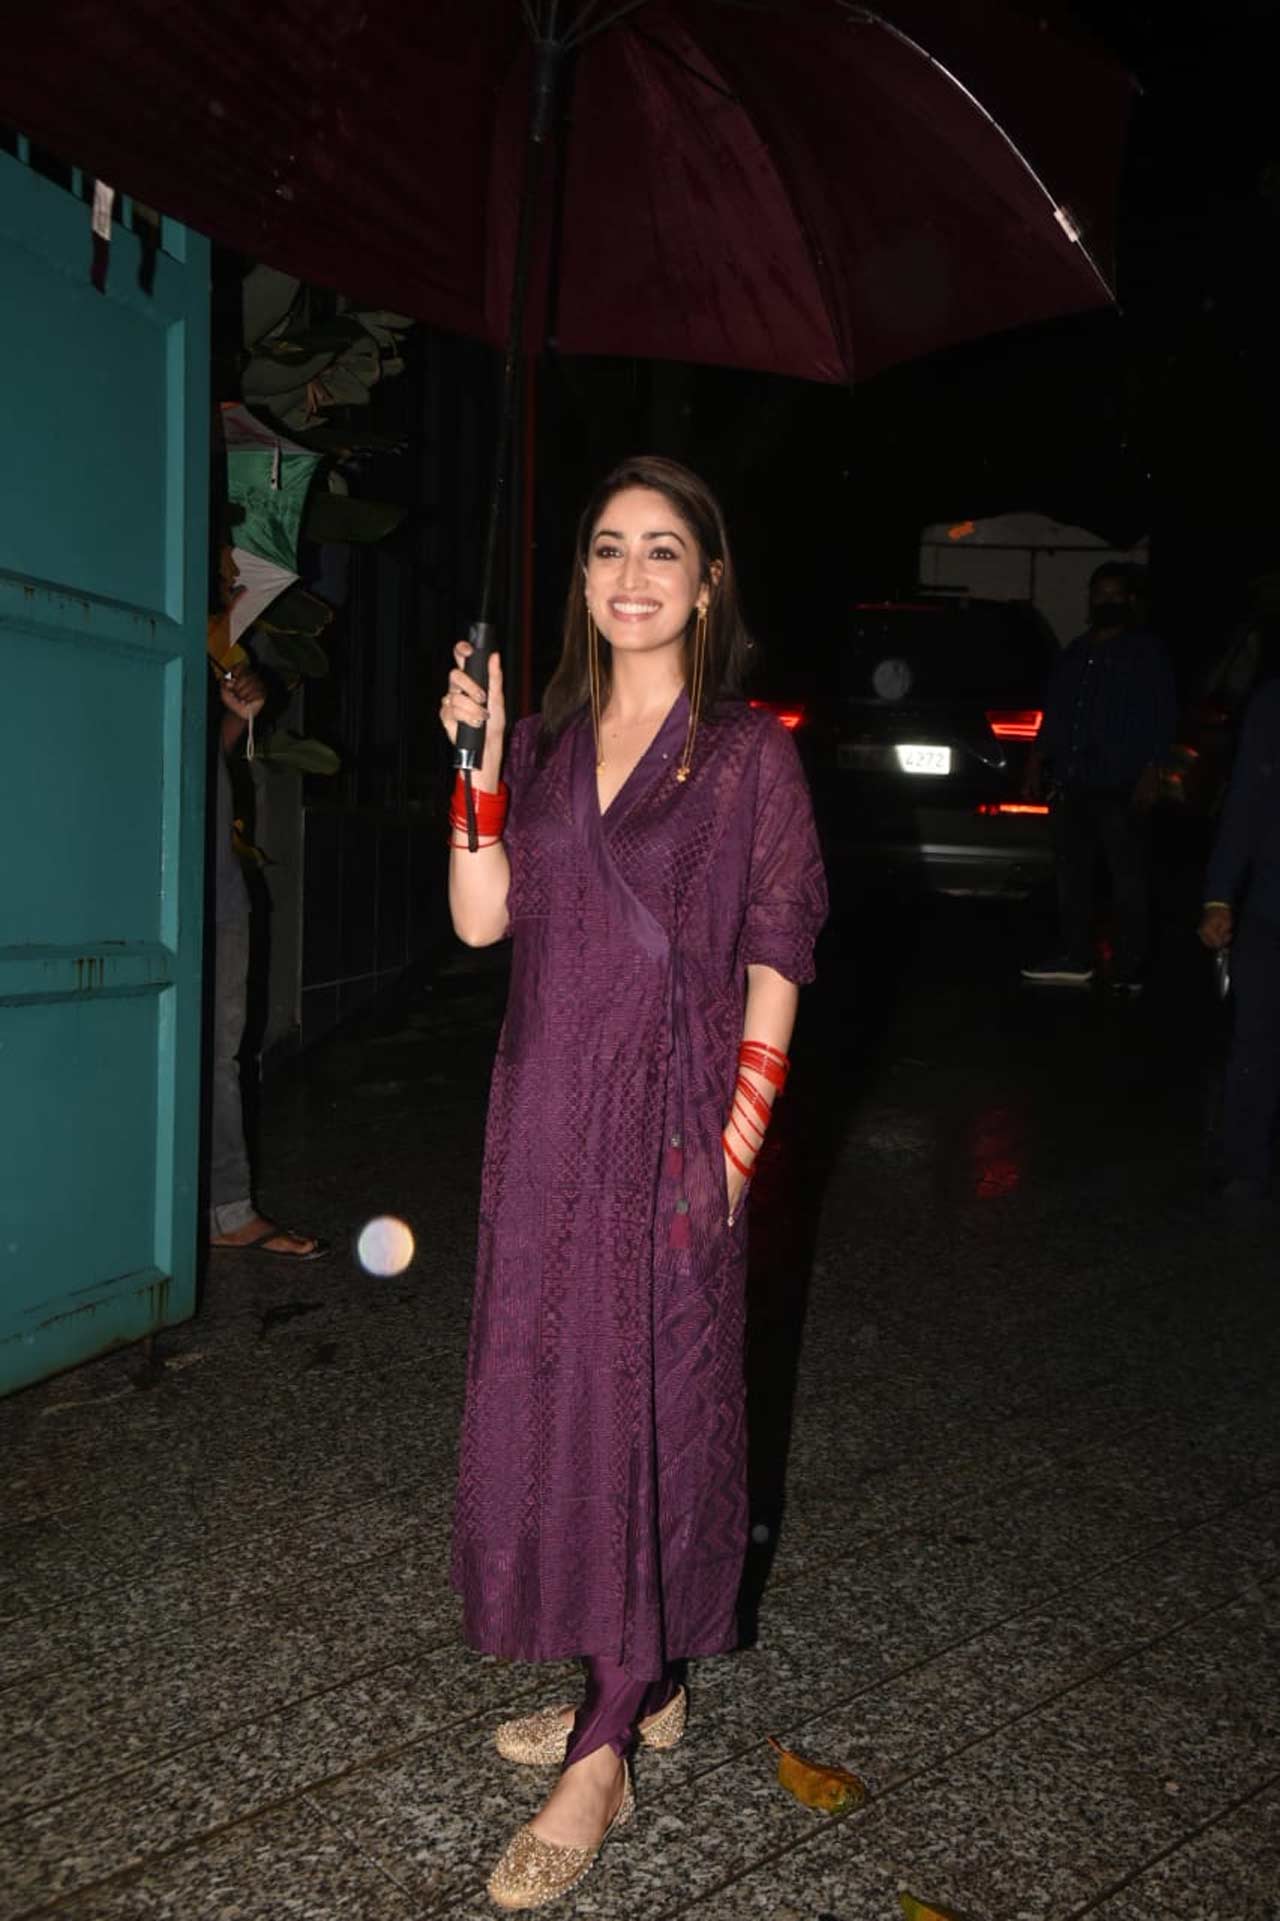 Kriti SaYami Gautam was all smiles when clicked at Dinesh Vijan's Bandra home. The actress opted for a wrap-around Kurti, paired with the same coloured pyjama during the outing. On the work front, she will be next seen in 'Bhoot Police.'